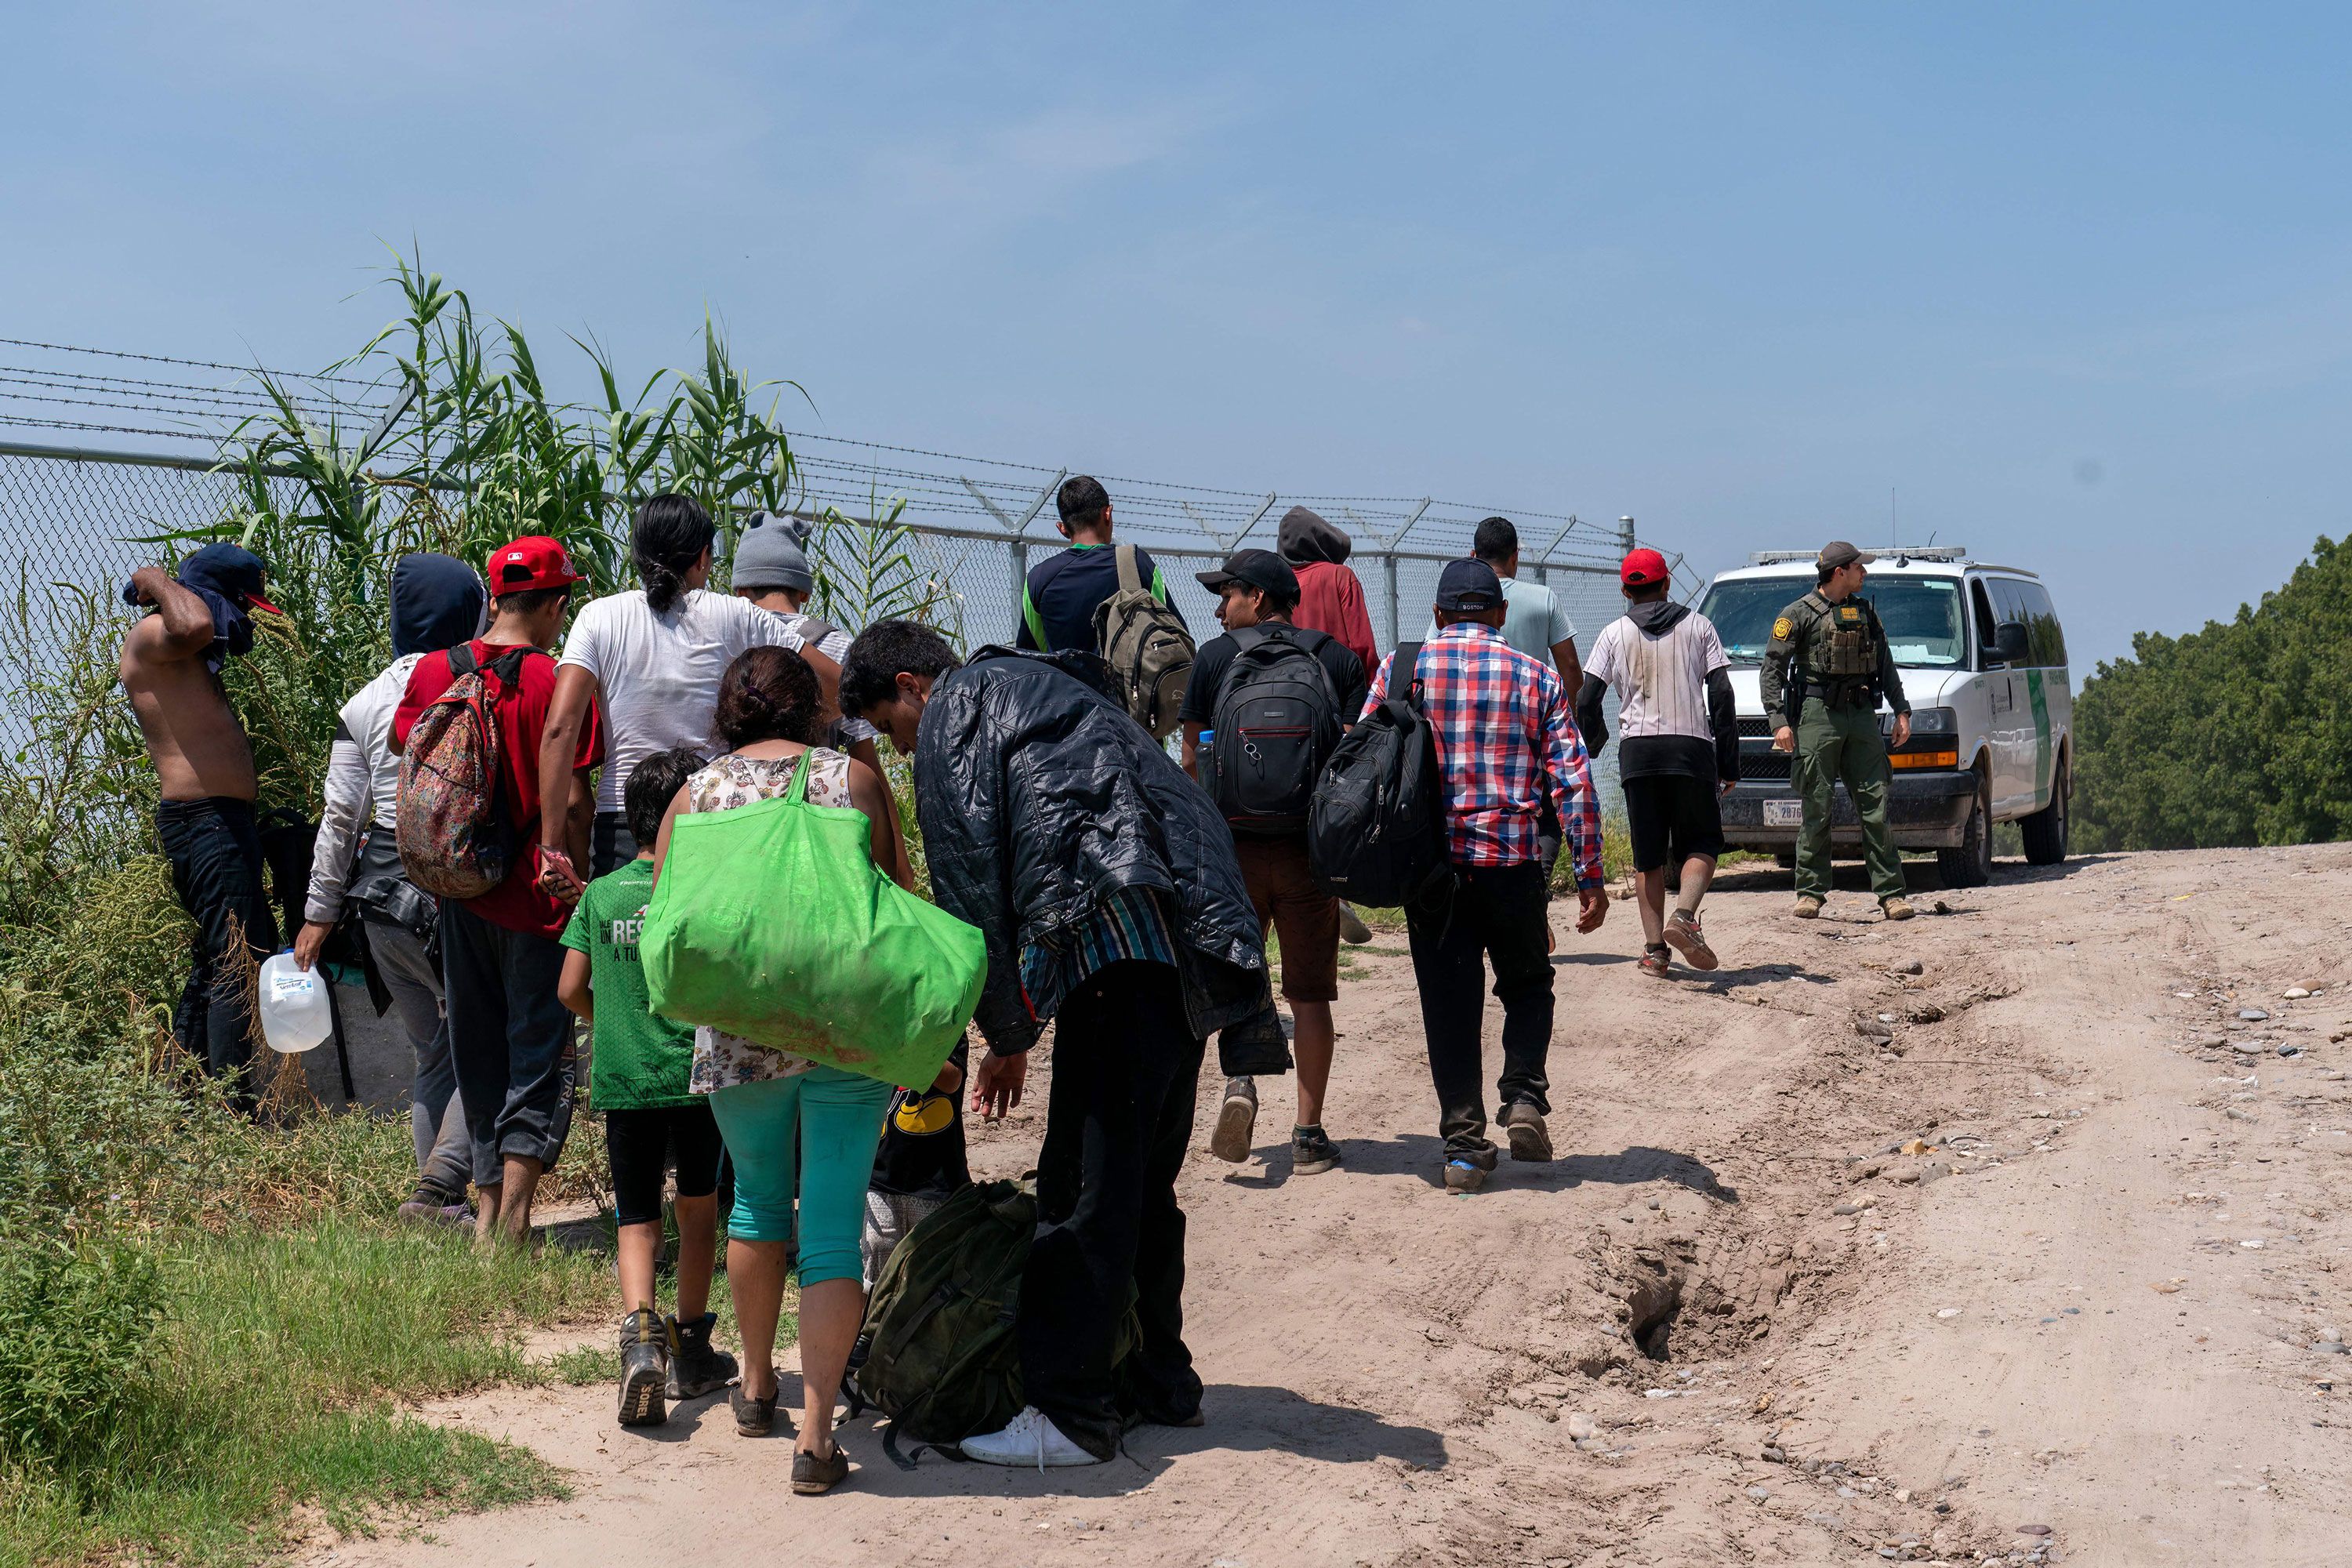 Migrant crossings along the southern US border are rising